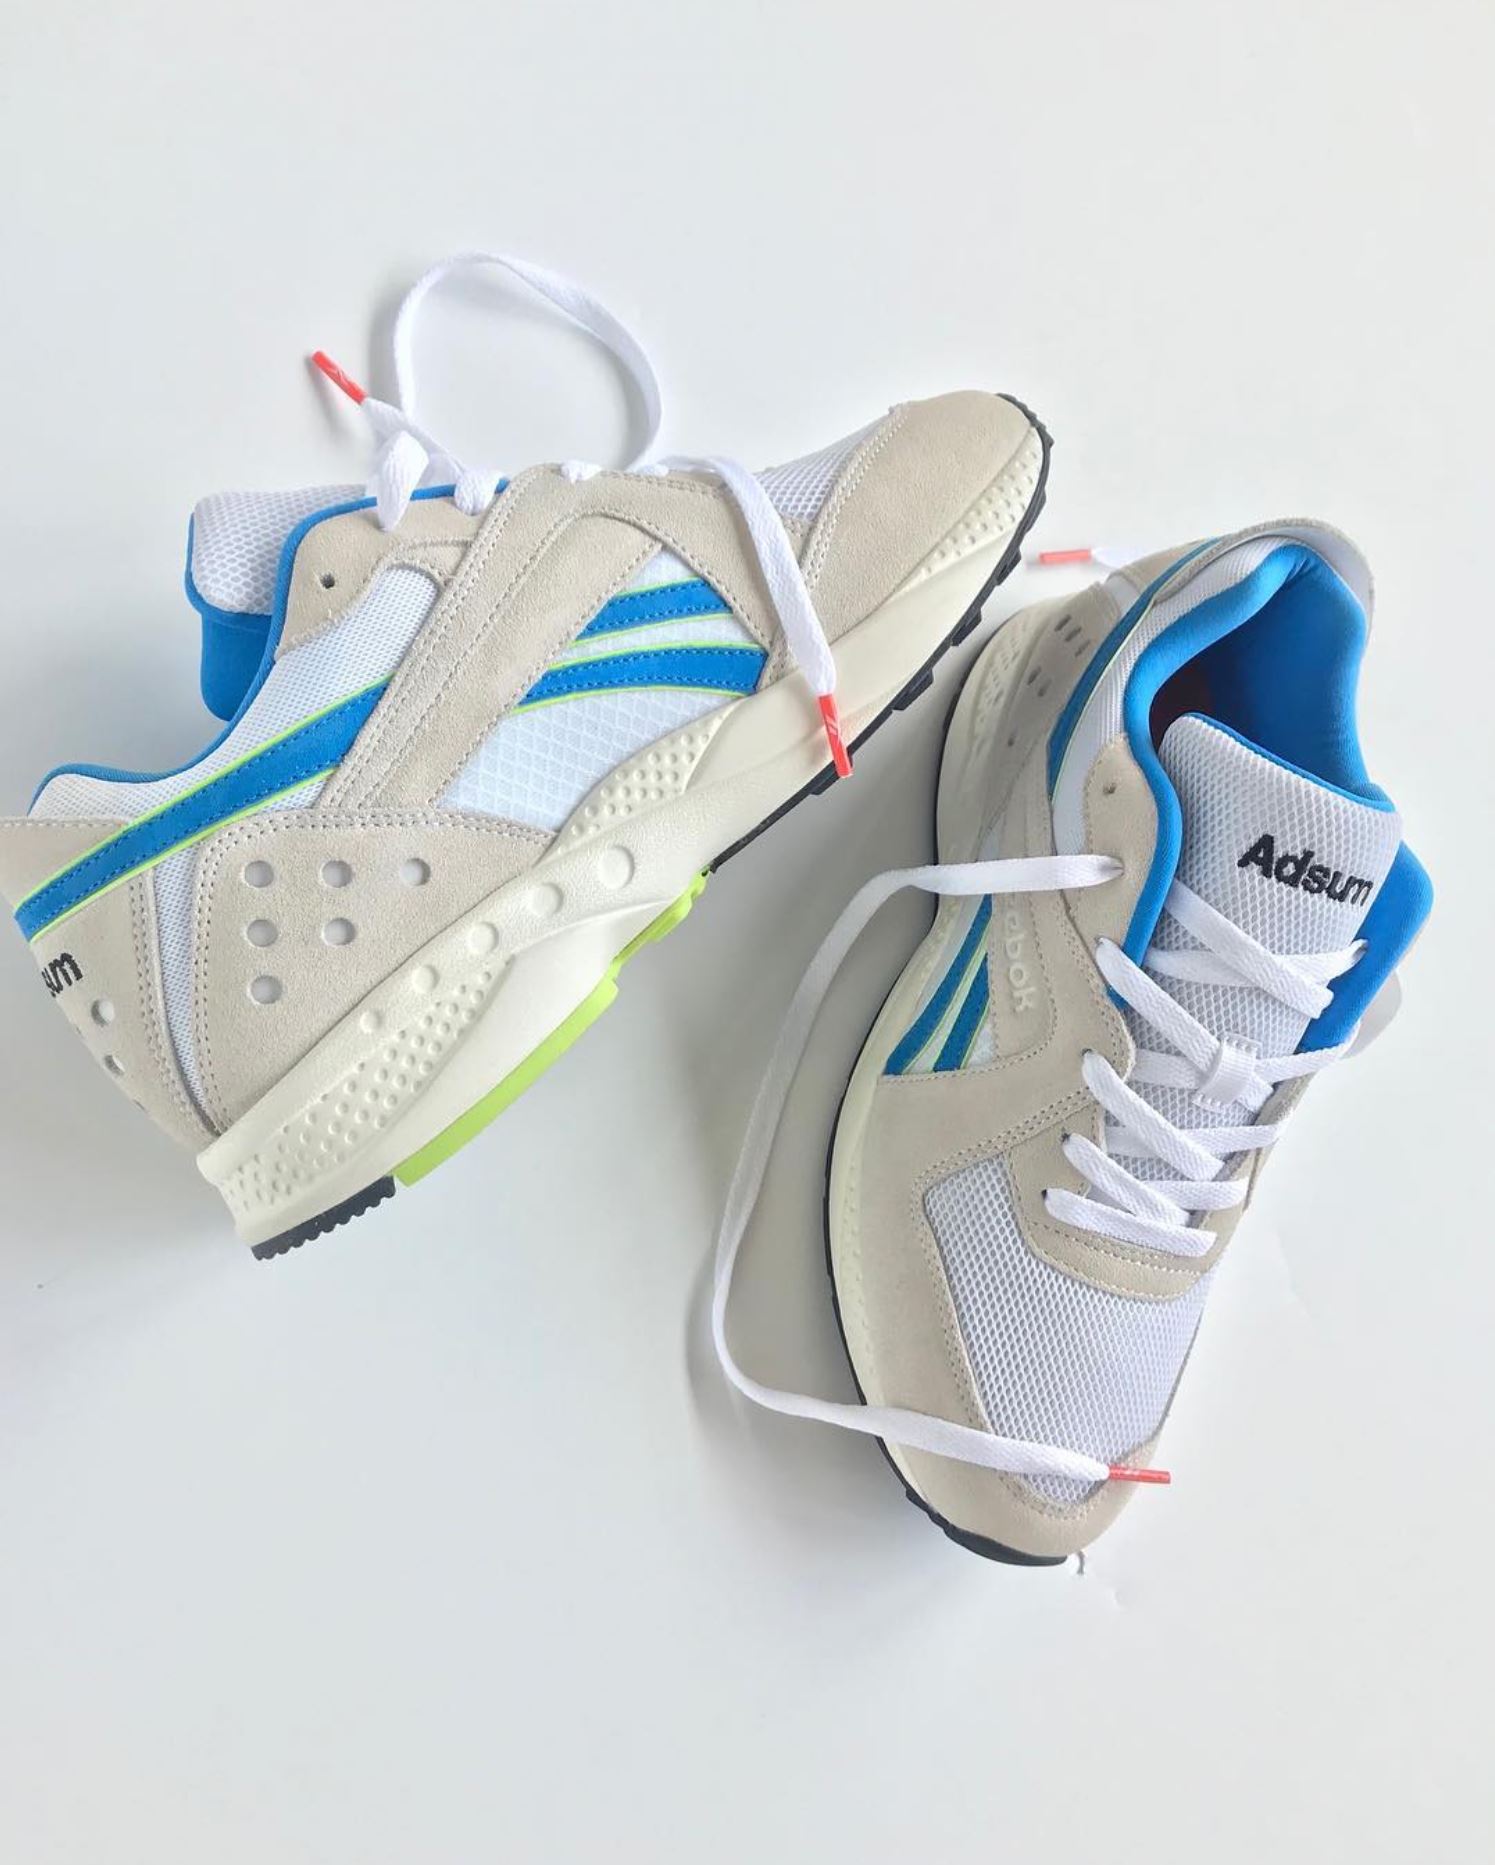 Look Out for This Adsum x Reebok Pyro Collab - WearTesters